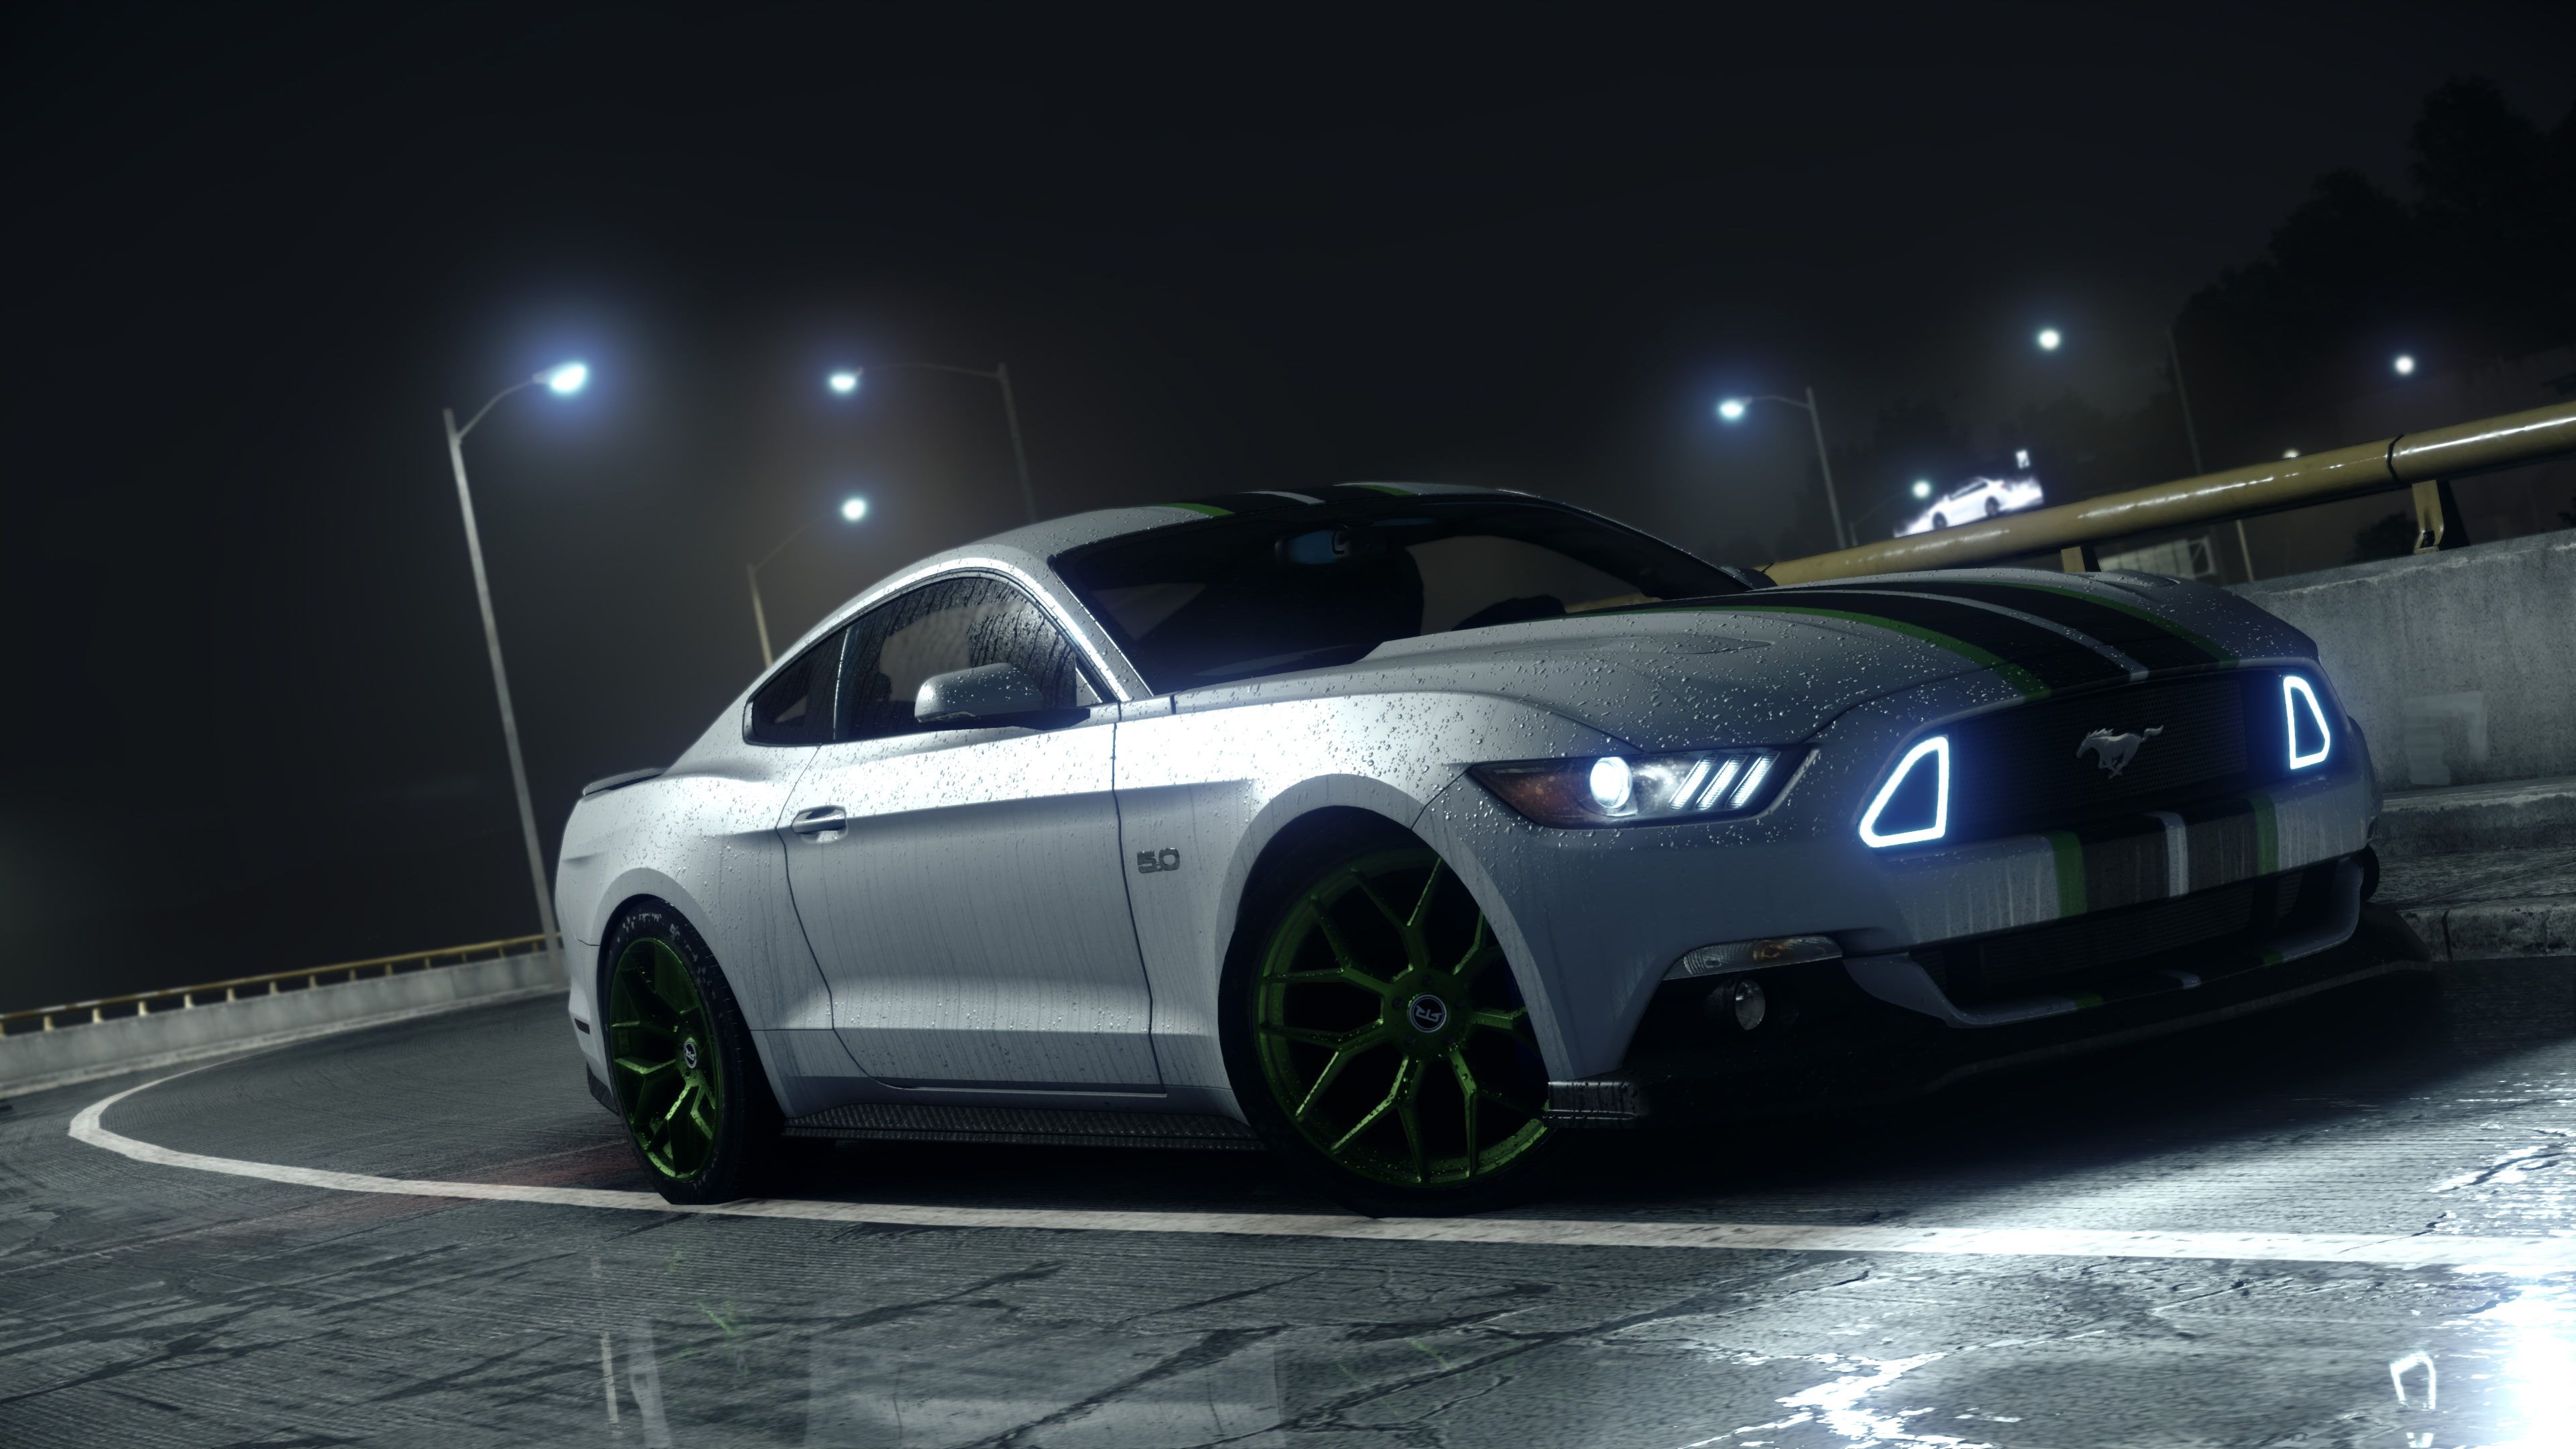 need for speed payback need for speed #games 2017 games #hd ford mustang k #artist #flickr K #wallpape. Ford mustang wallpaper, Mustang gtr, Mustang wallpaper